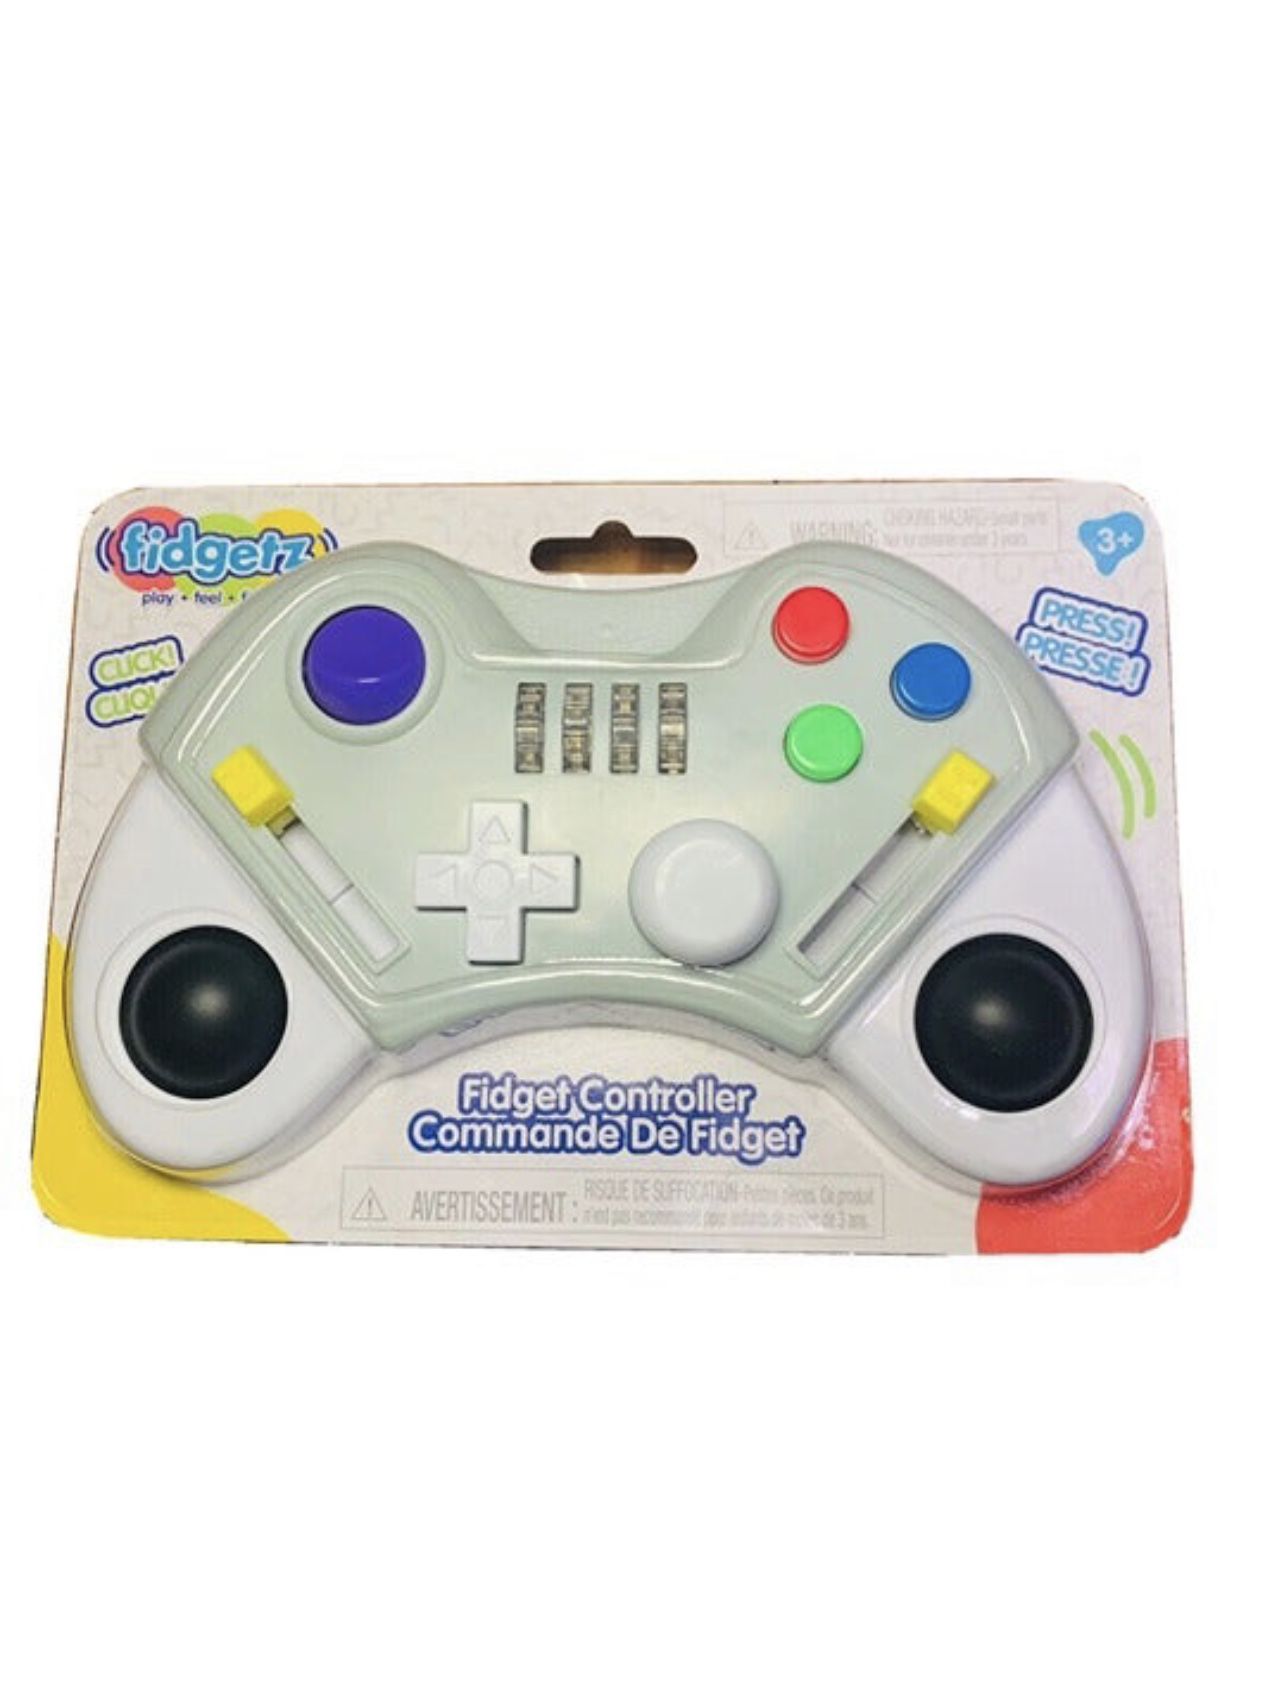 Kids Fidget Toy Sensory Toy Game Controller - Just Play - Pops Clicks & Buttons